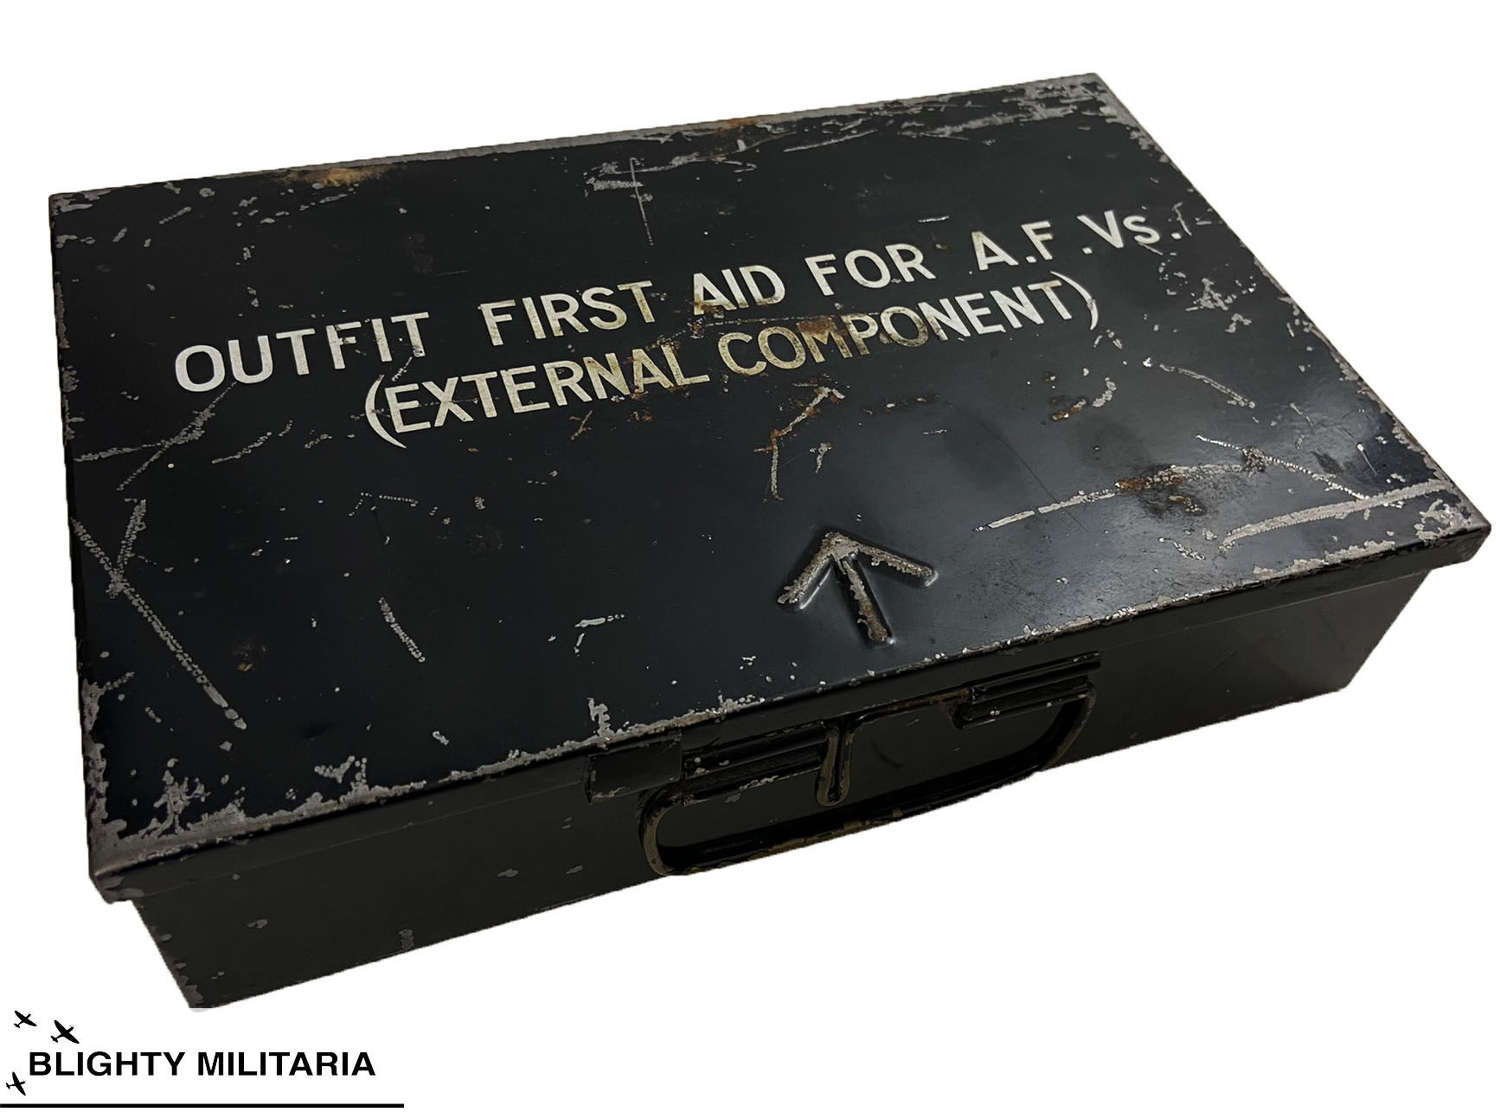 Original British Army 'Outfit First Aid for A. F. Vs'